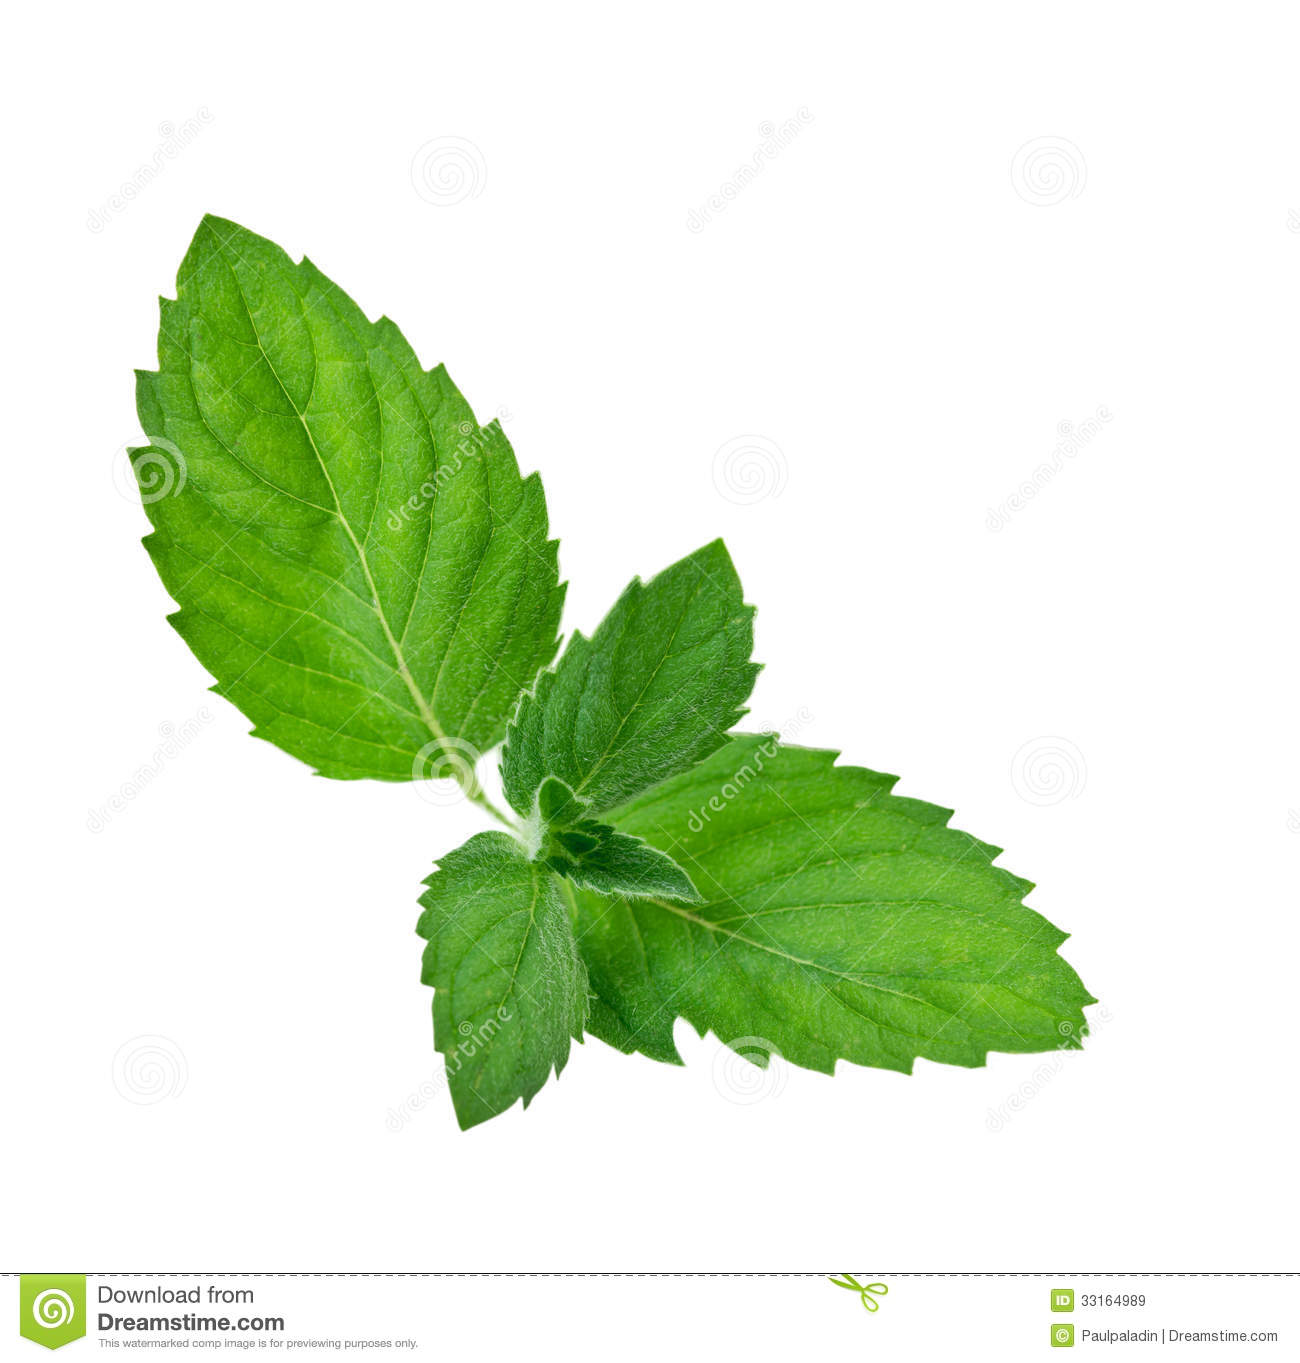 Green Mint Leaf Royalty Free Stock Images   Image  33164989